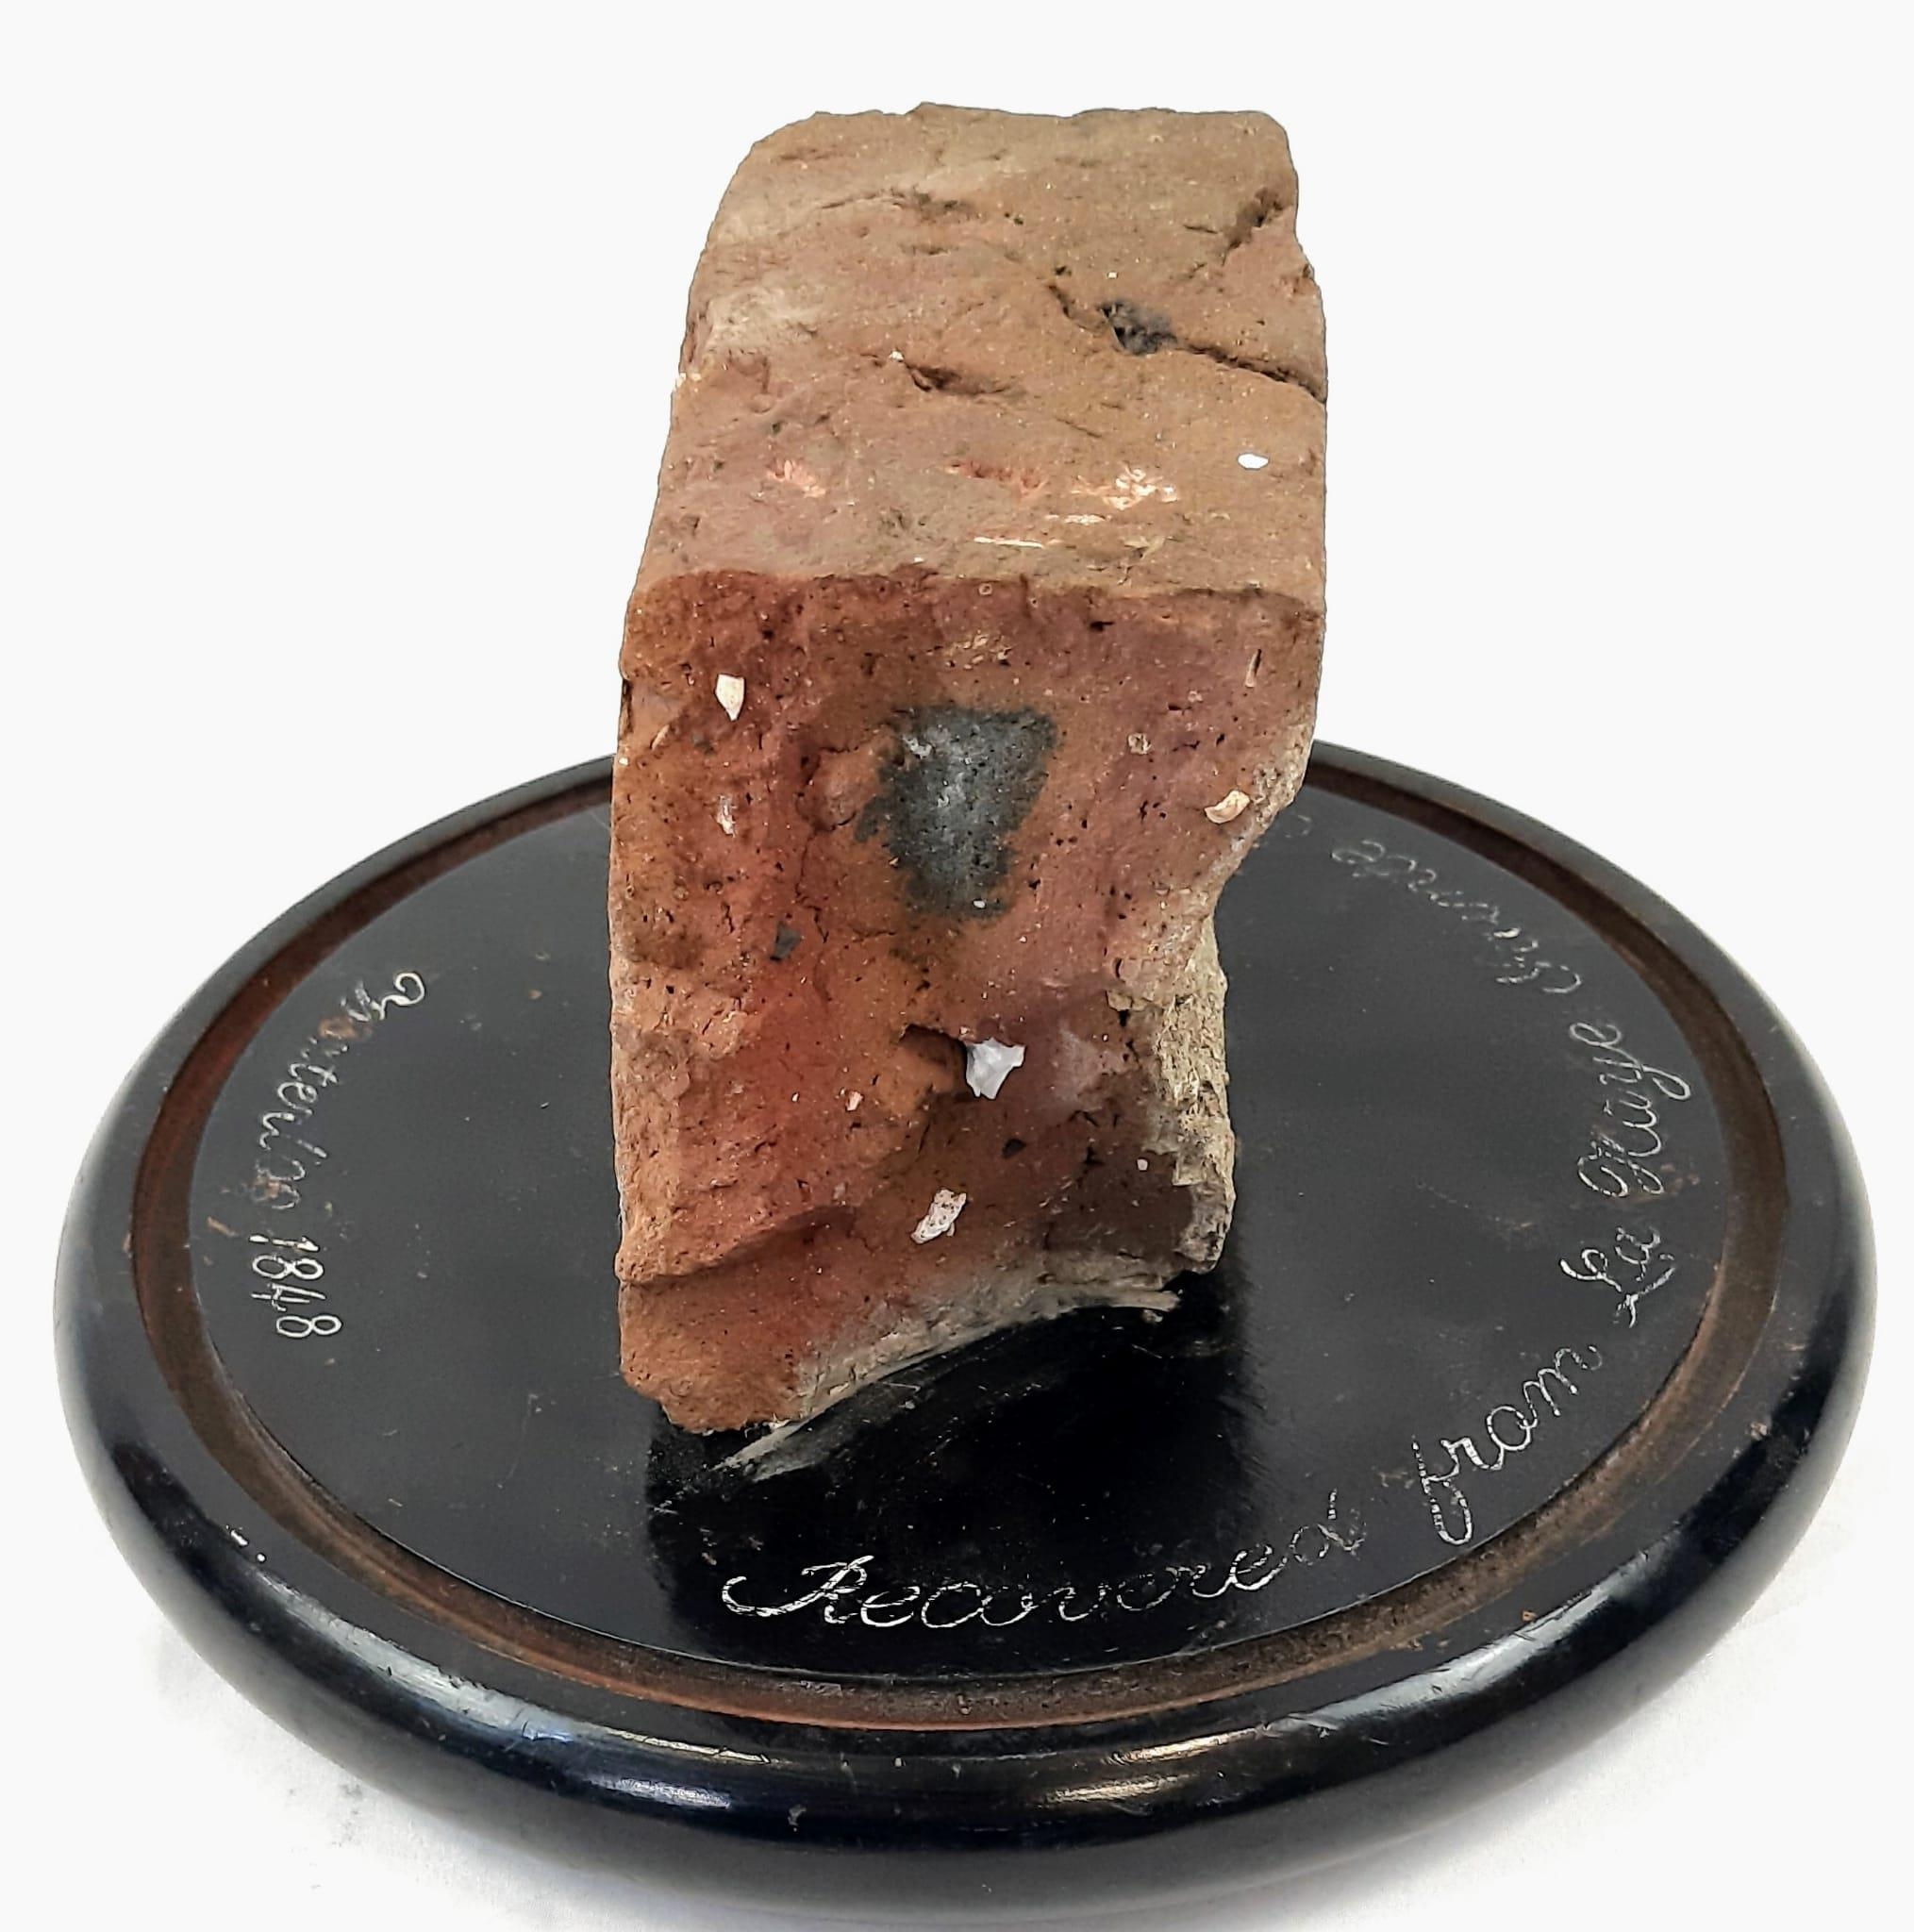 A Waterloo Brick! A Brick From The Farmhouse La Haye Sainte, Waterloo. It contains a musket ball - - Image 2 of 9